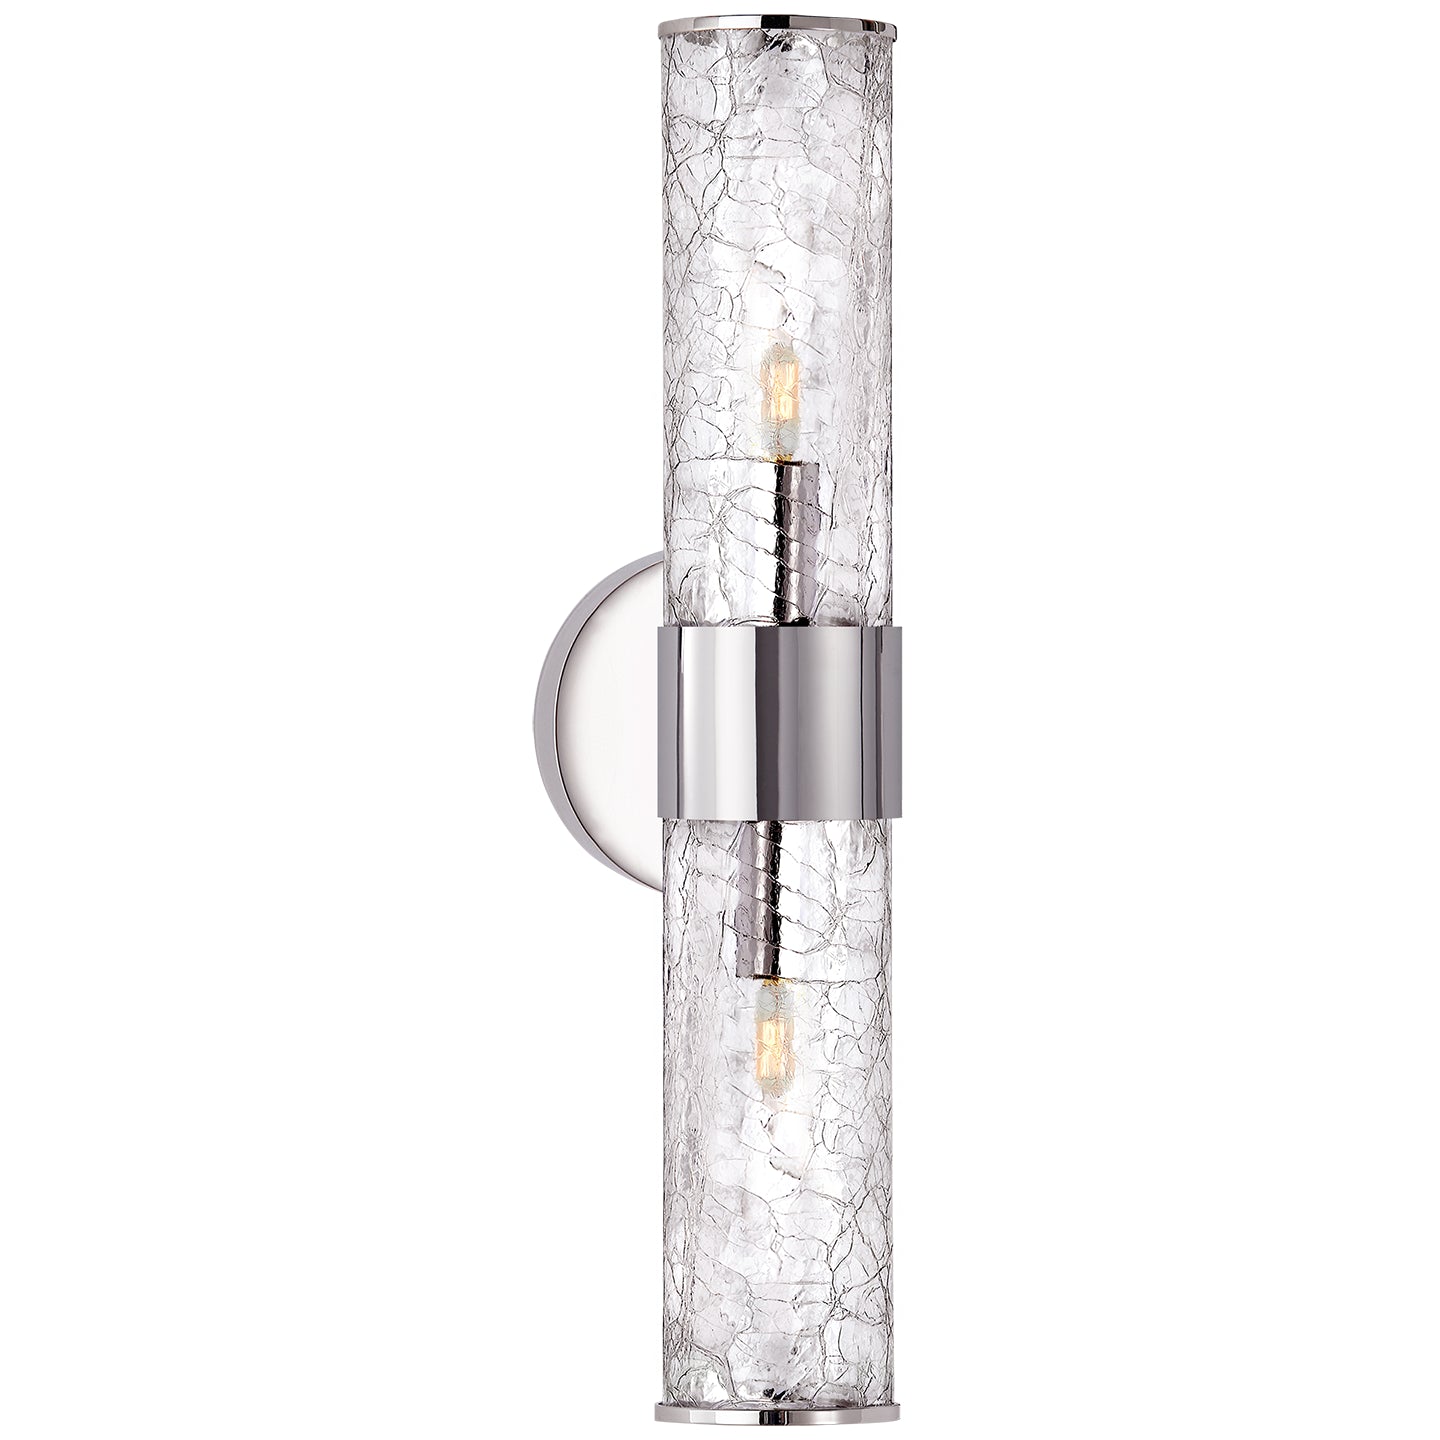 Load image into Gallery viewer, Visual Comfort Signature - KW 2118PN-CRG - Two Light Wall Sconce - Liaison - Polished Nickel
